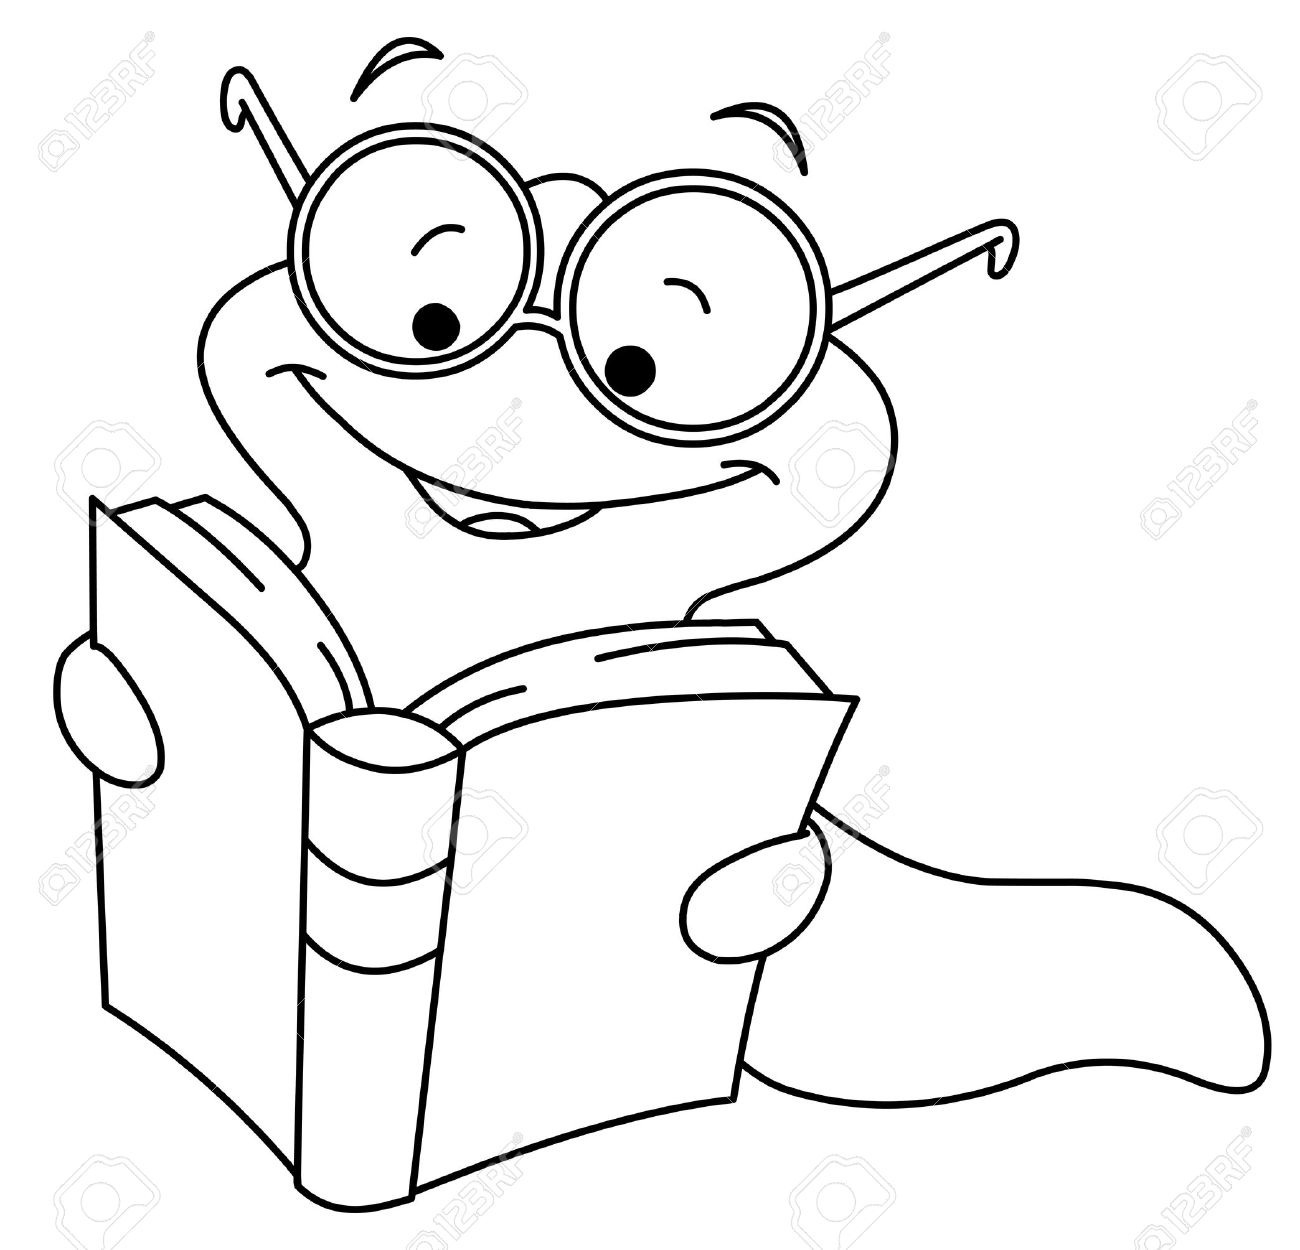 Bookworm clipart black and white. Better of letter master